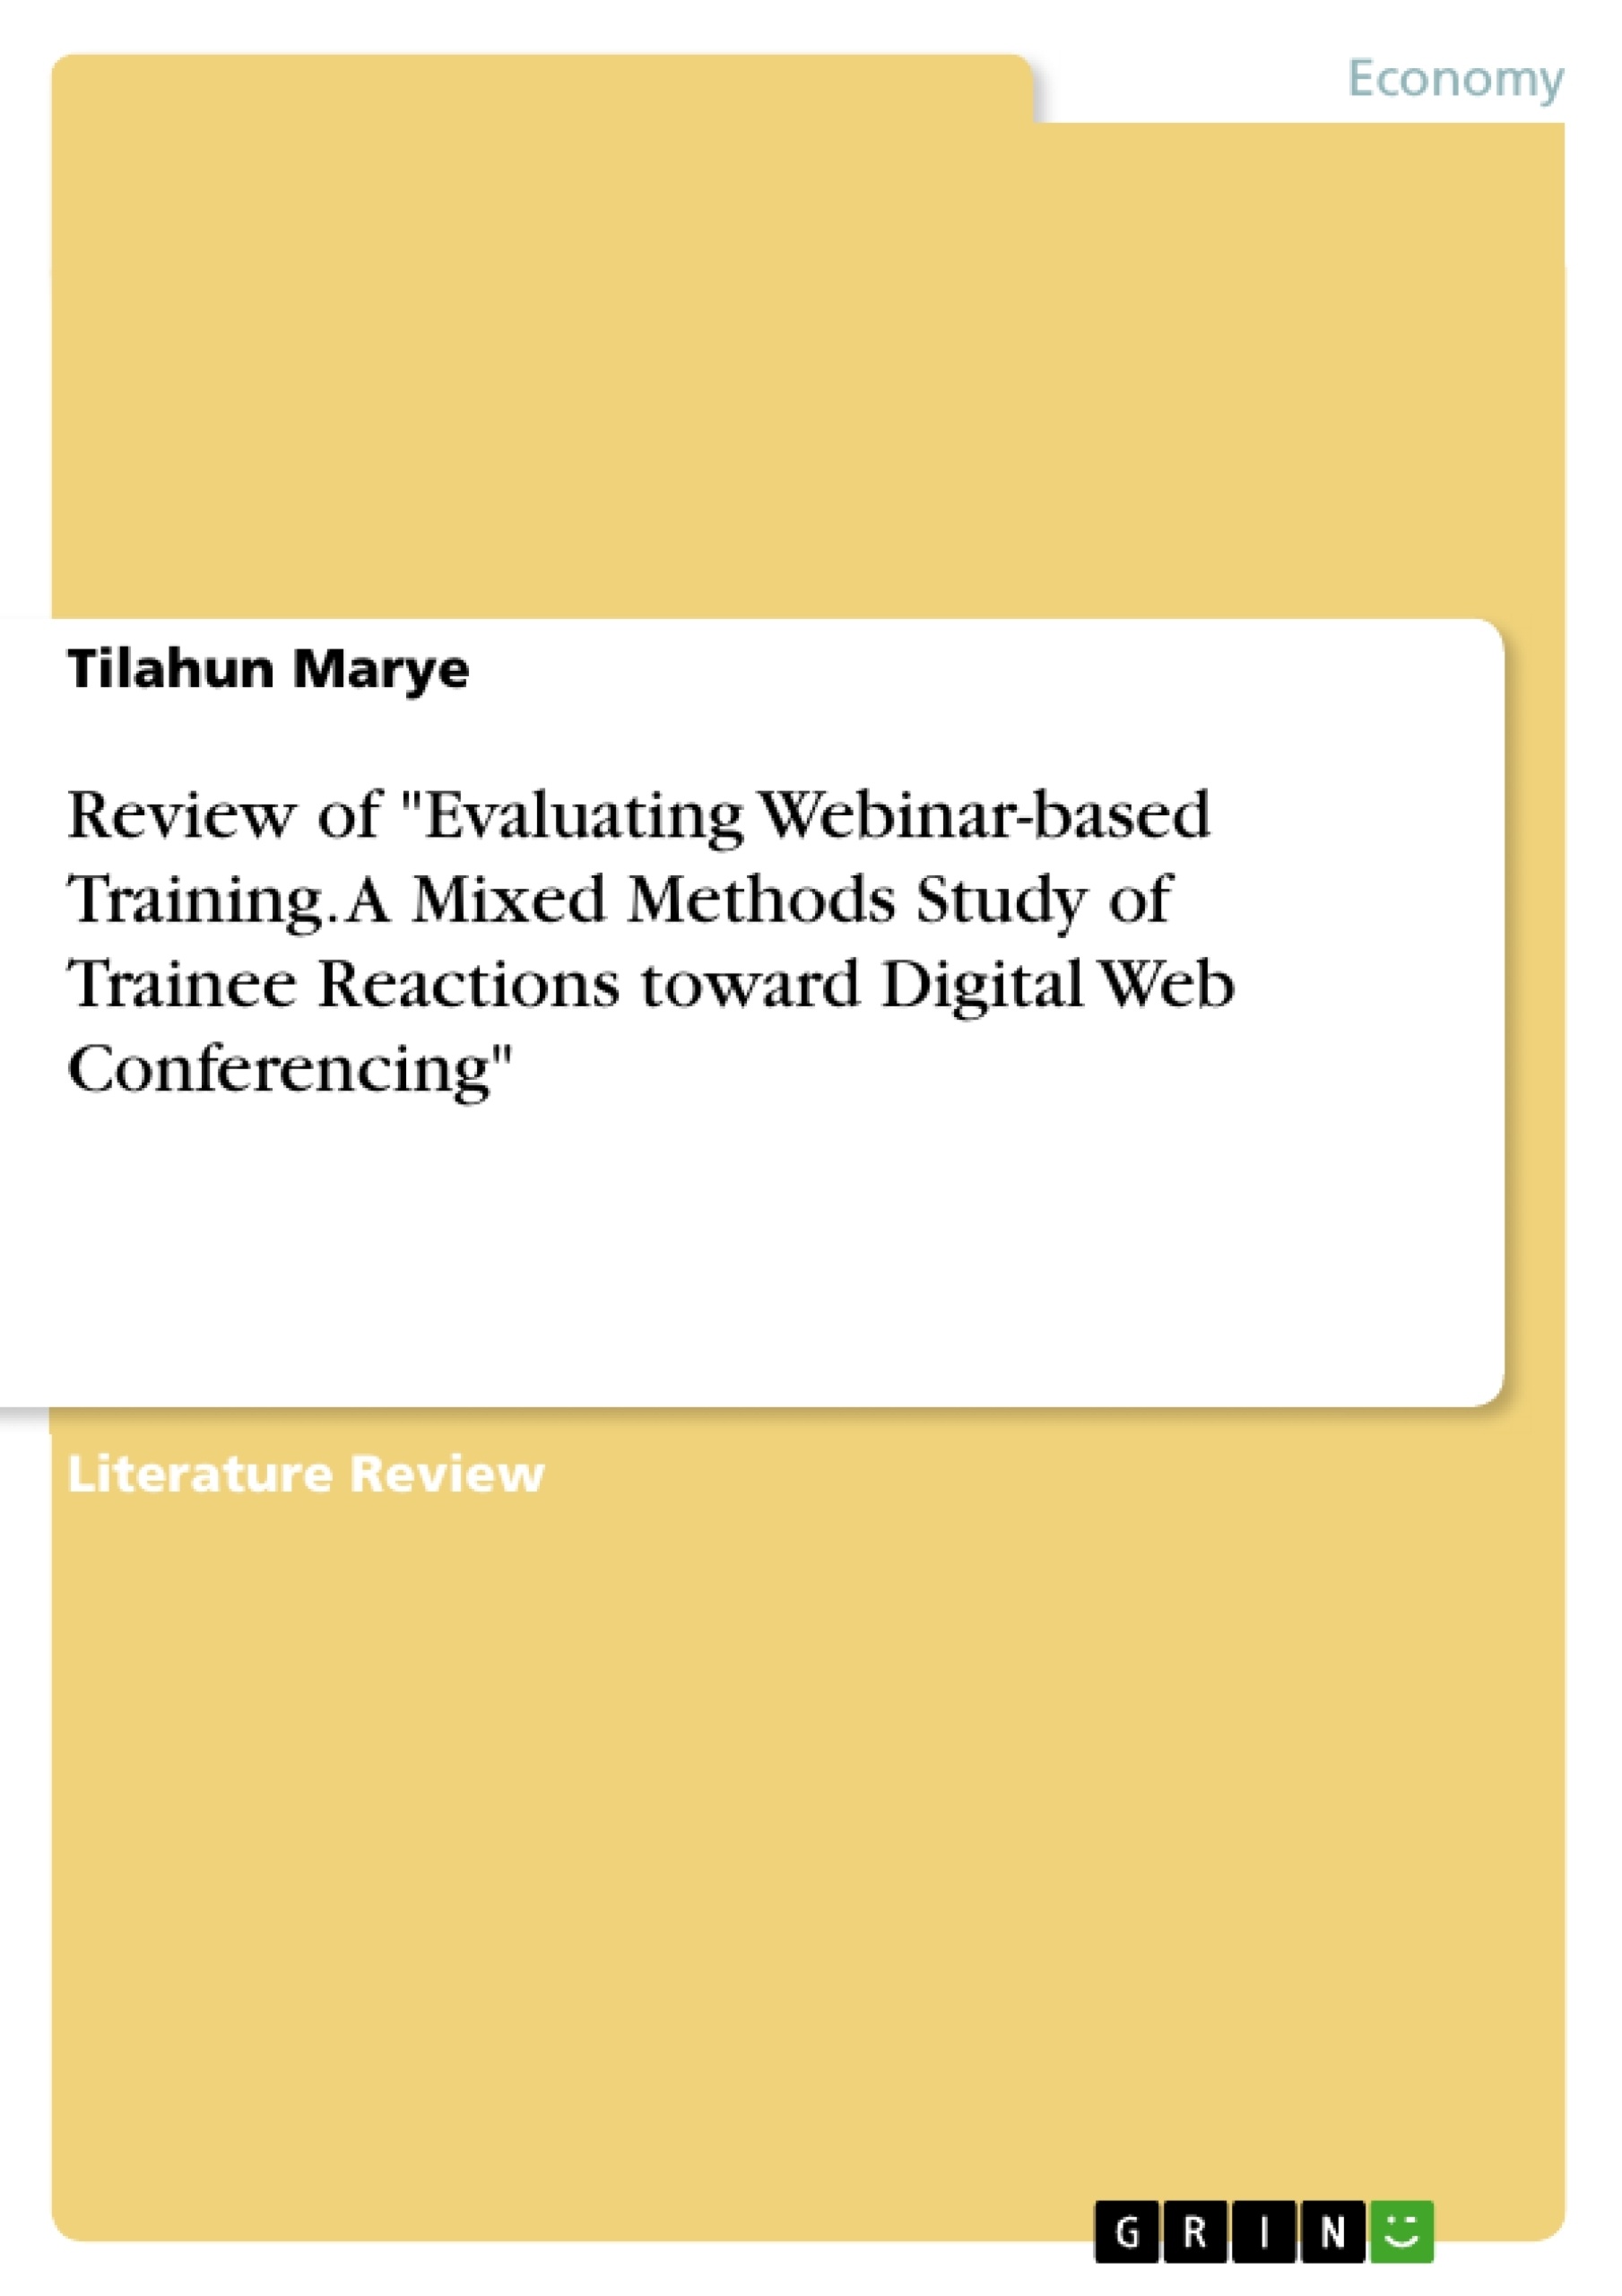 Titre: Review of "Evaluating Webinar-based Training. A Mixed Methods Study of Trainee Reactions toward Digital Web Conferencing"